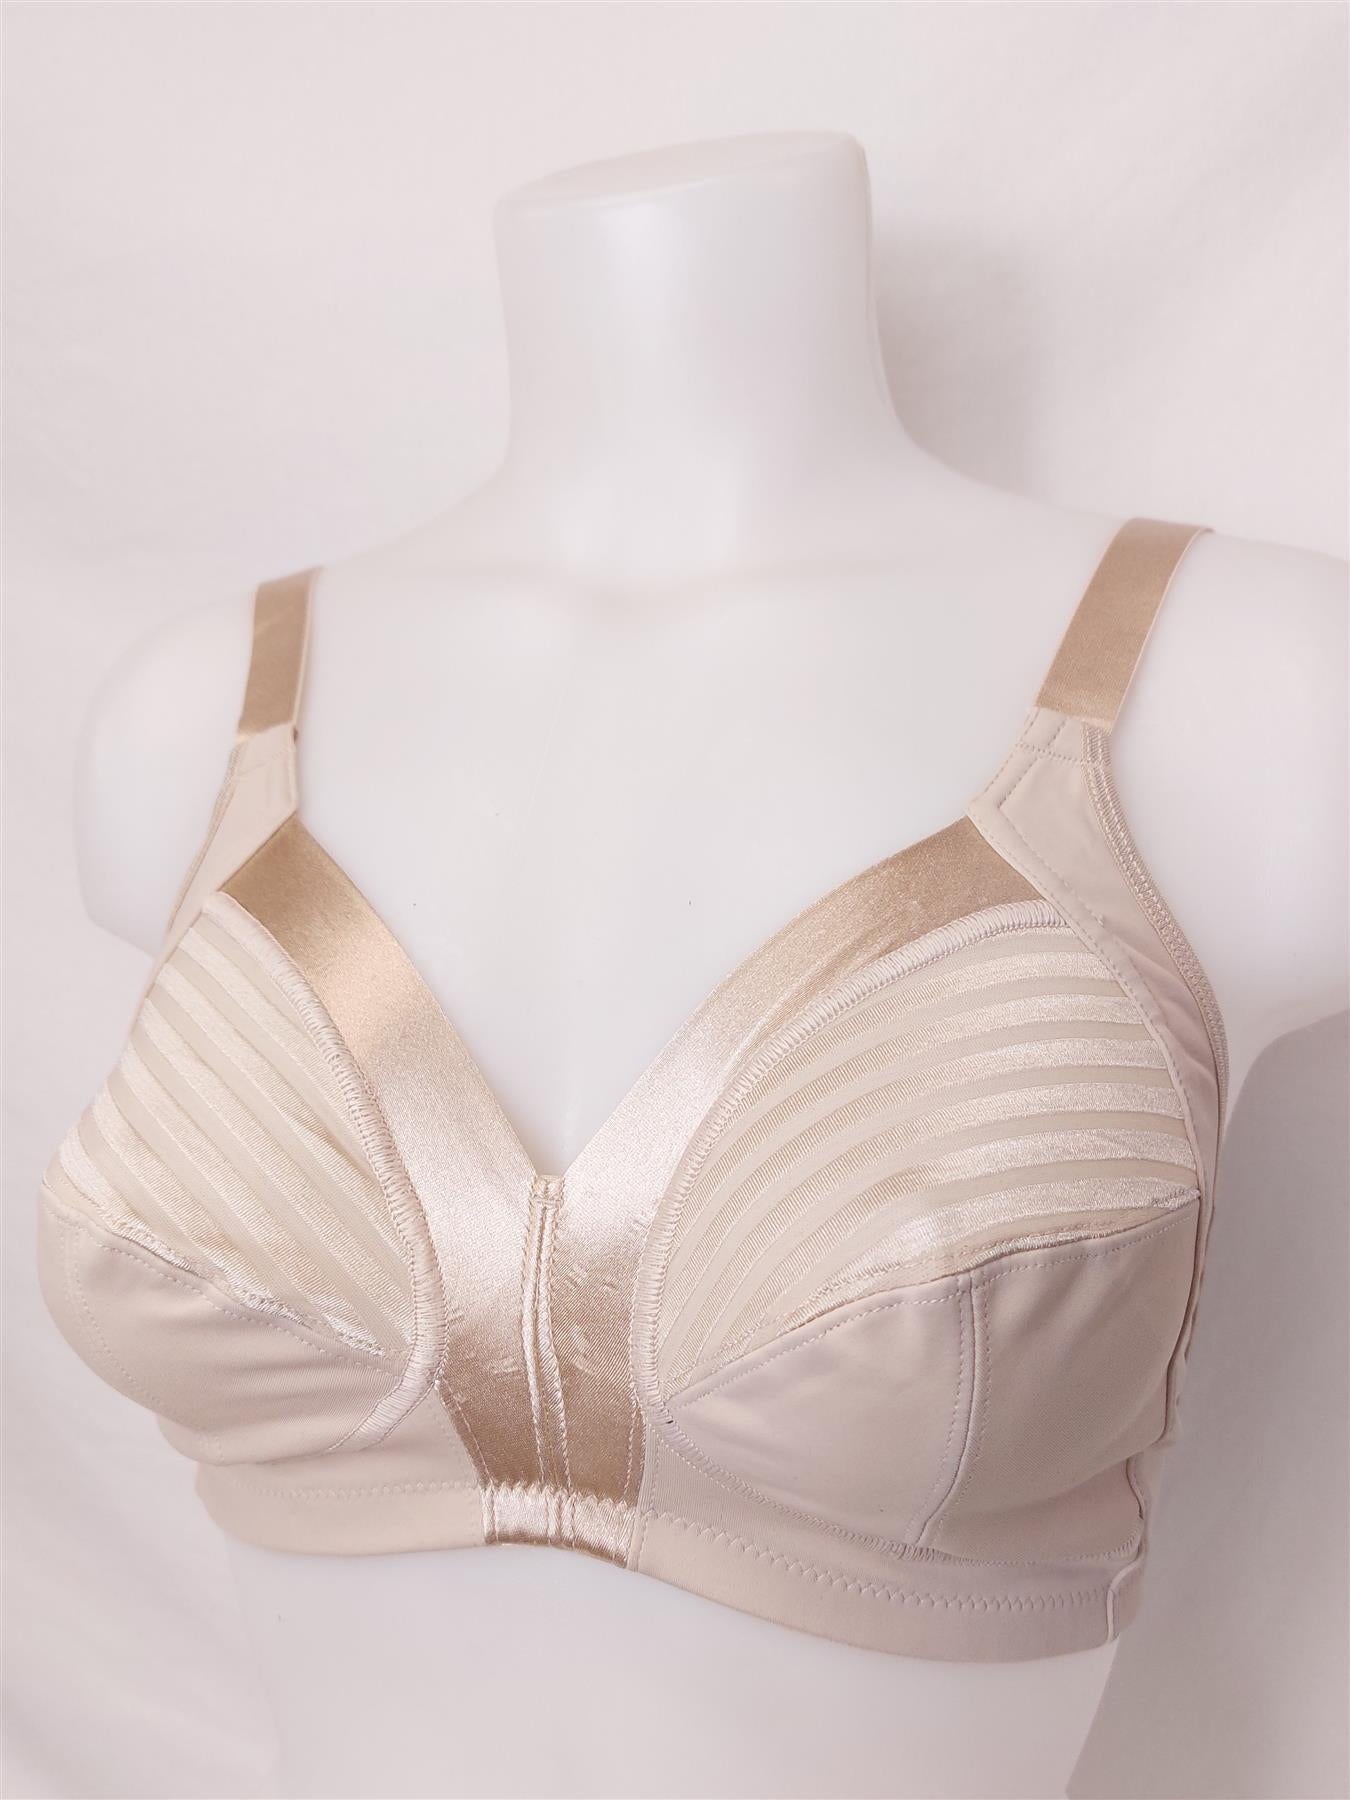 Full Support Comfort Bra Non-Wired Unpadded Striped 34-44 B-H (Shop Soiled) New